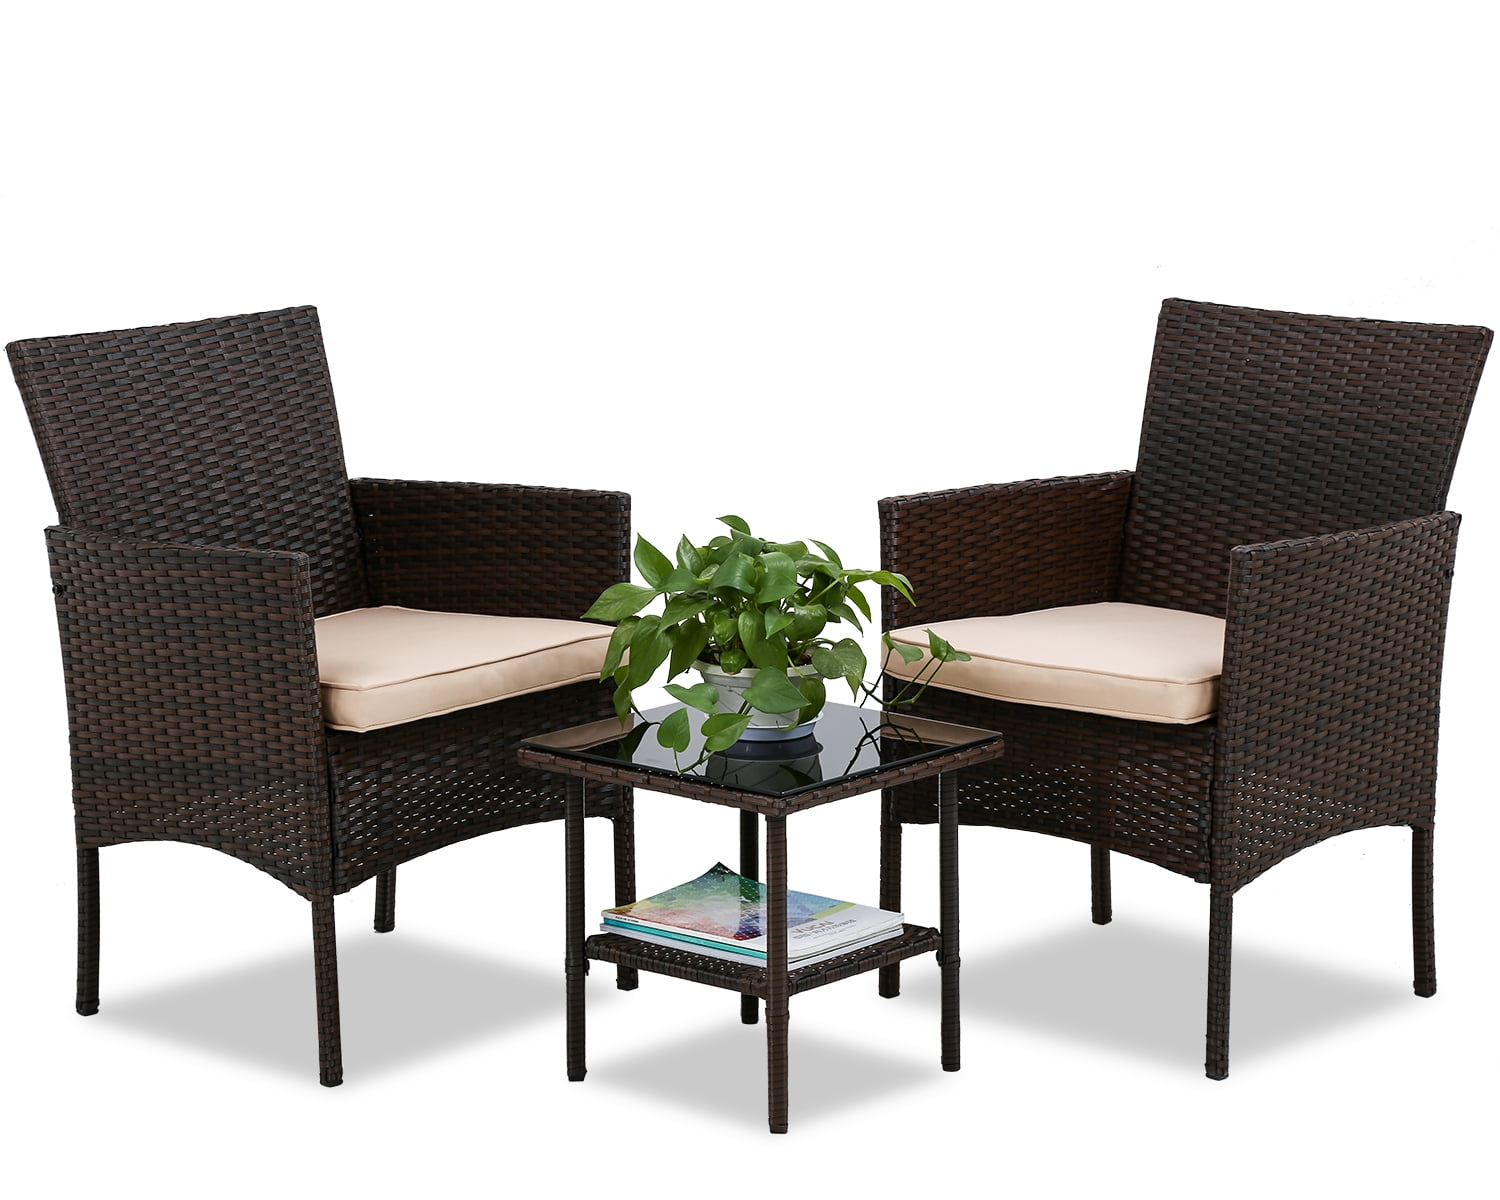 Fdw Outdoor Patio Furniture Sets 3 Pieces Set Wicker Bistro Rattan Chair Conversation Garden Porch For Yard And With Coffee Table Brown Com - Three Piece Patio Wicker Set